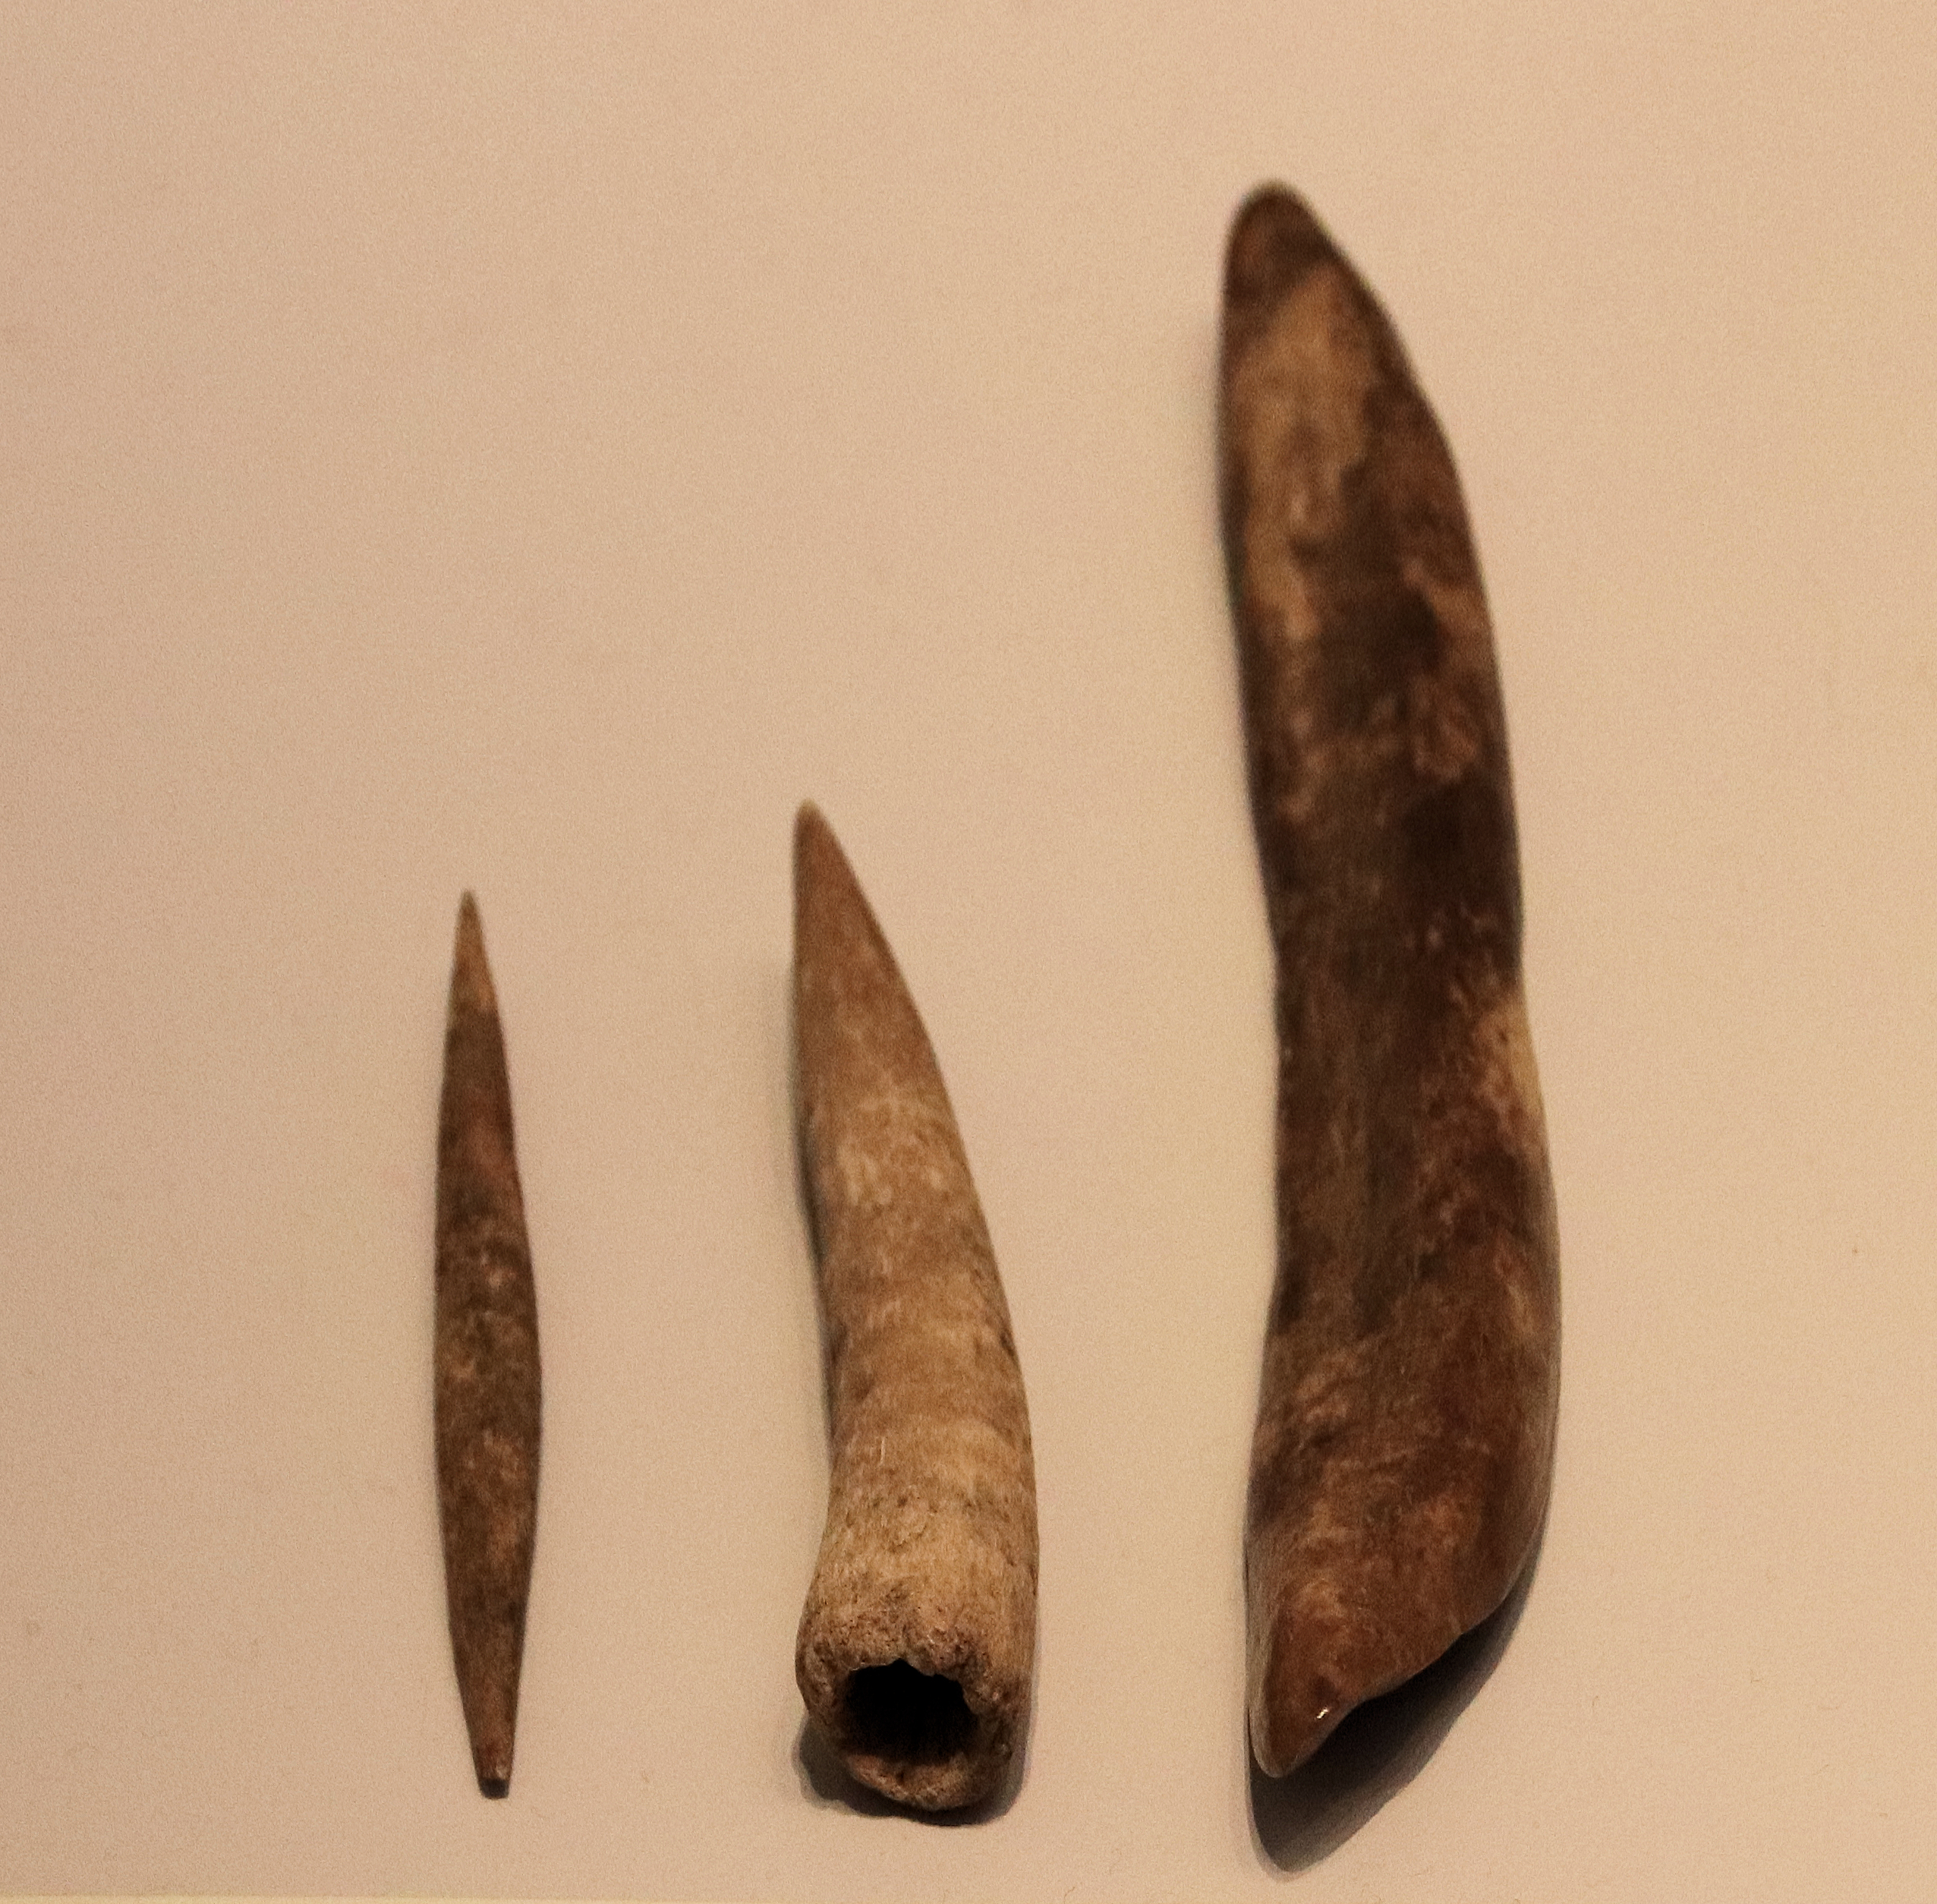 Aurignacian Culture bone tools (needdle, points and tools for punching holes), Hayonim Cave, 30000 BP (Before Present). HaYonim Cave (Hebrew: מערת היונים, Me’arat HaYonim, lit. Cave of the Pigeons) is a cave located in a limestone bluff about 250 meters above modern sea level, in the Upper Galilee, Israel.